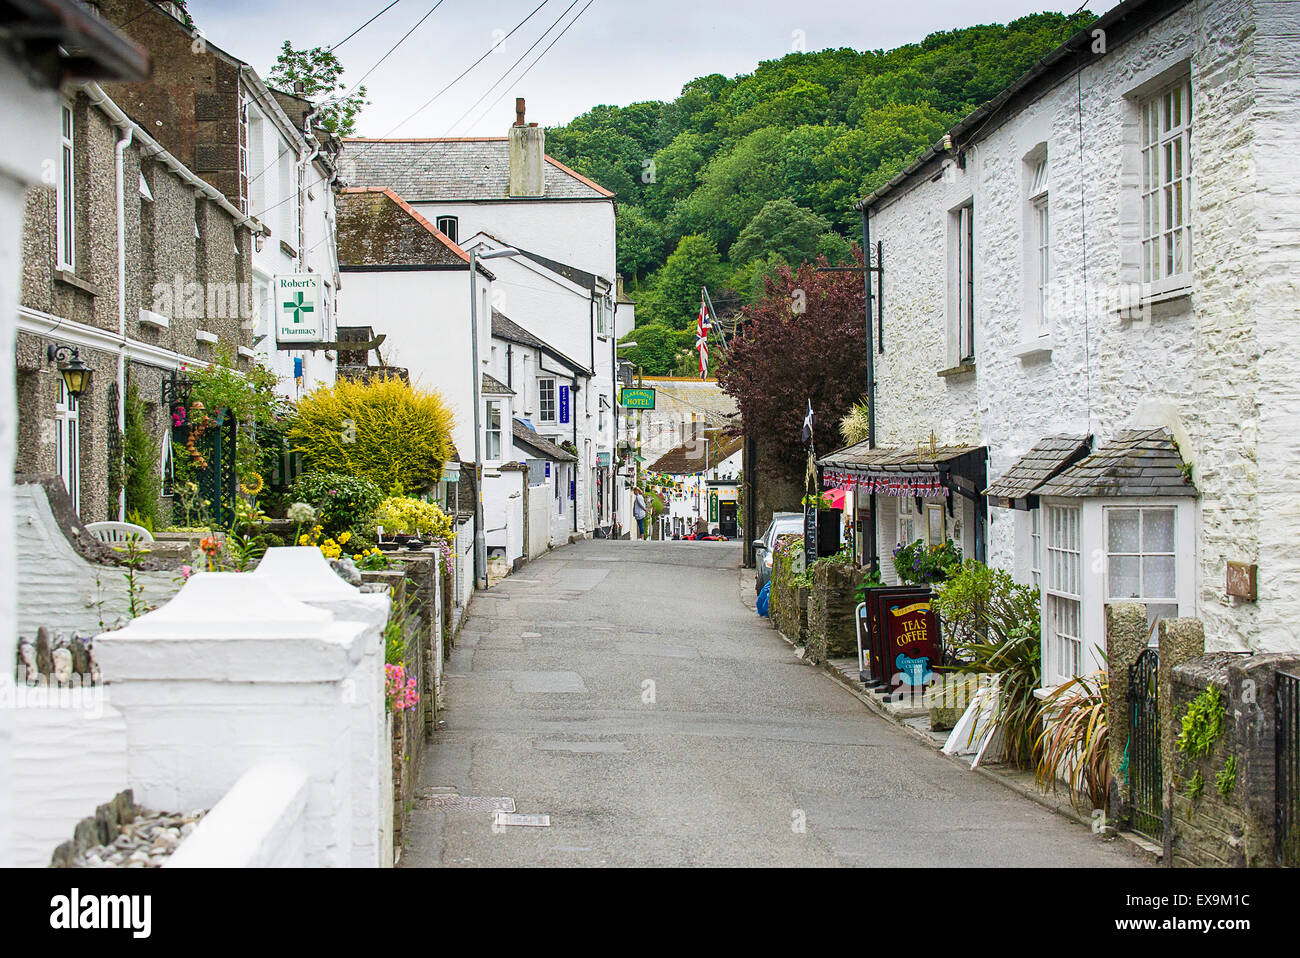 Cottages in a quaint street in the picturesque Cornish Polperro fishing village in Cornwall. Stock Photo